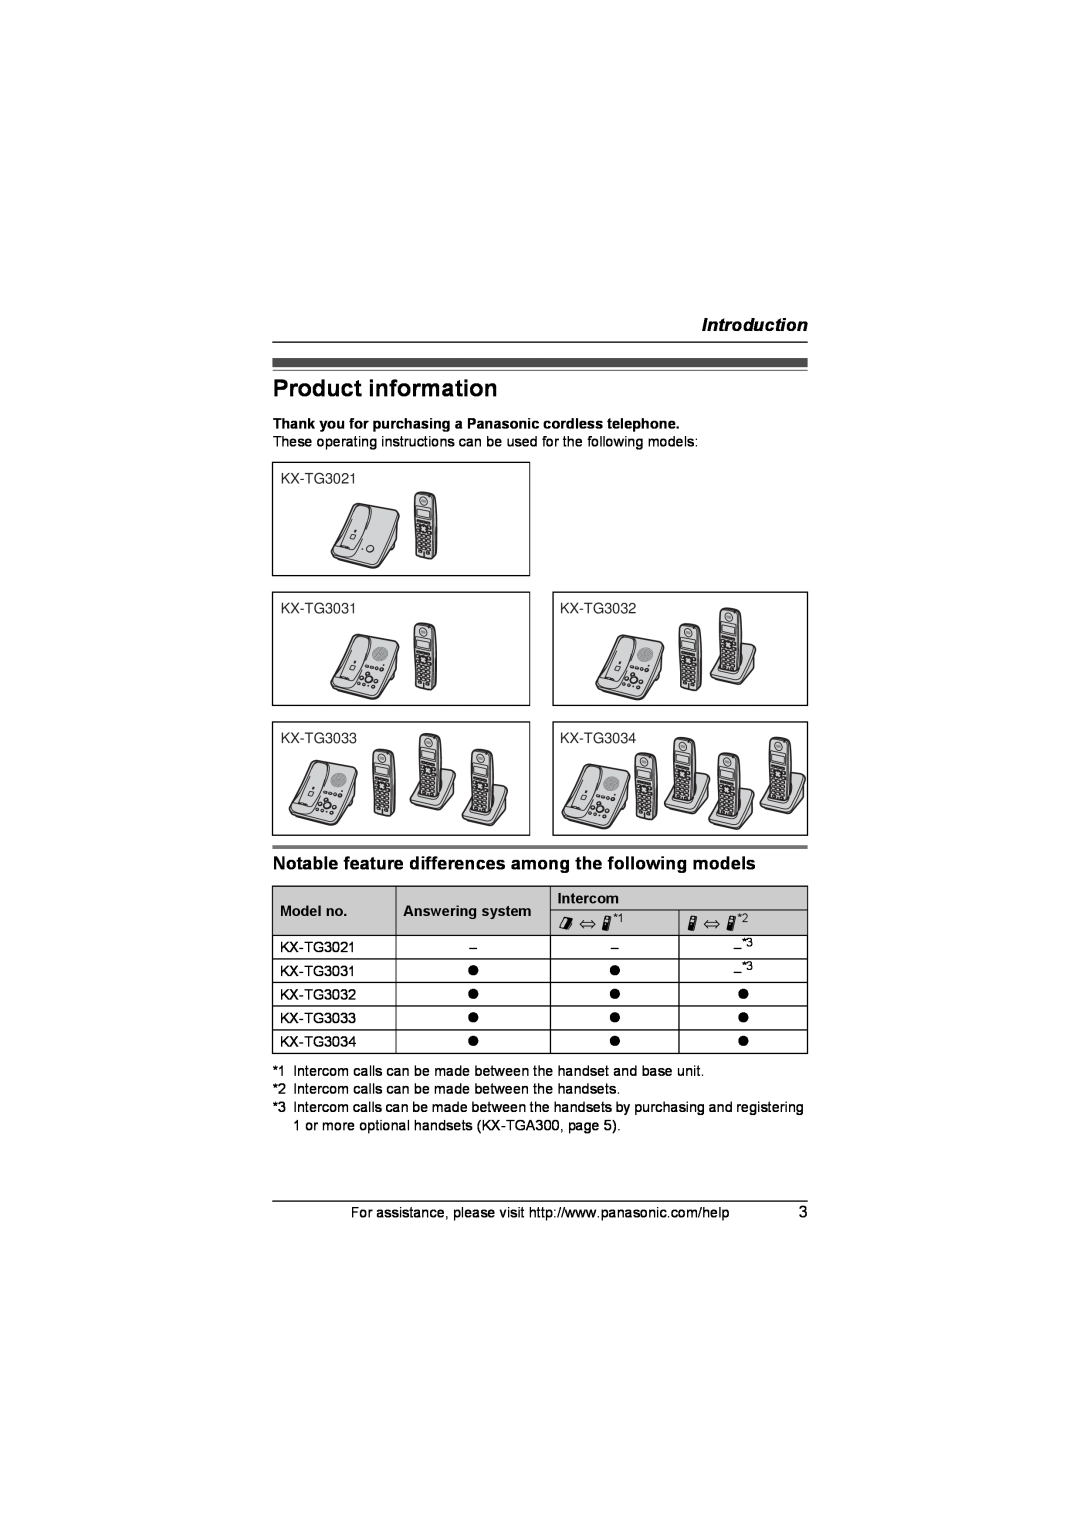 Panasonic KX-TG3033 Product information, Introduction, Notable feature differences among the following models, ⇔ N*1 